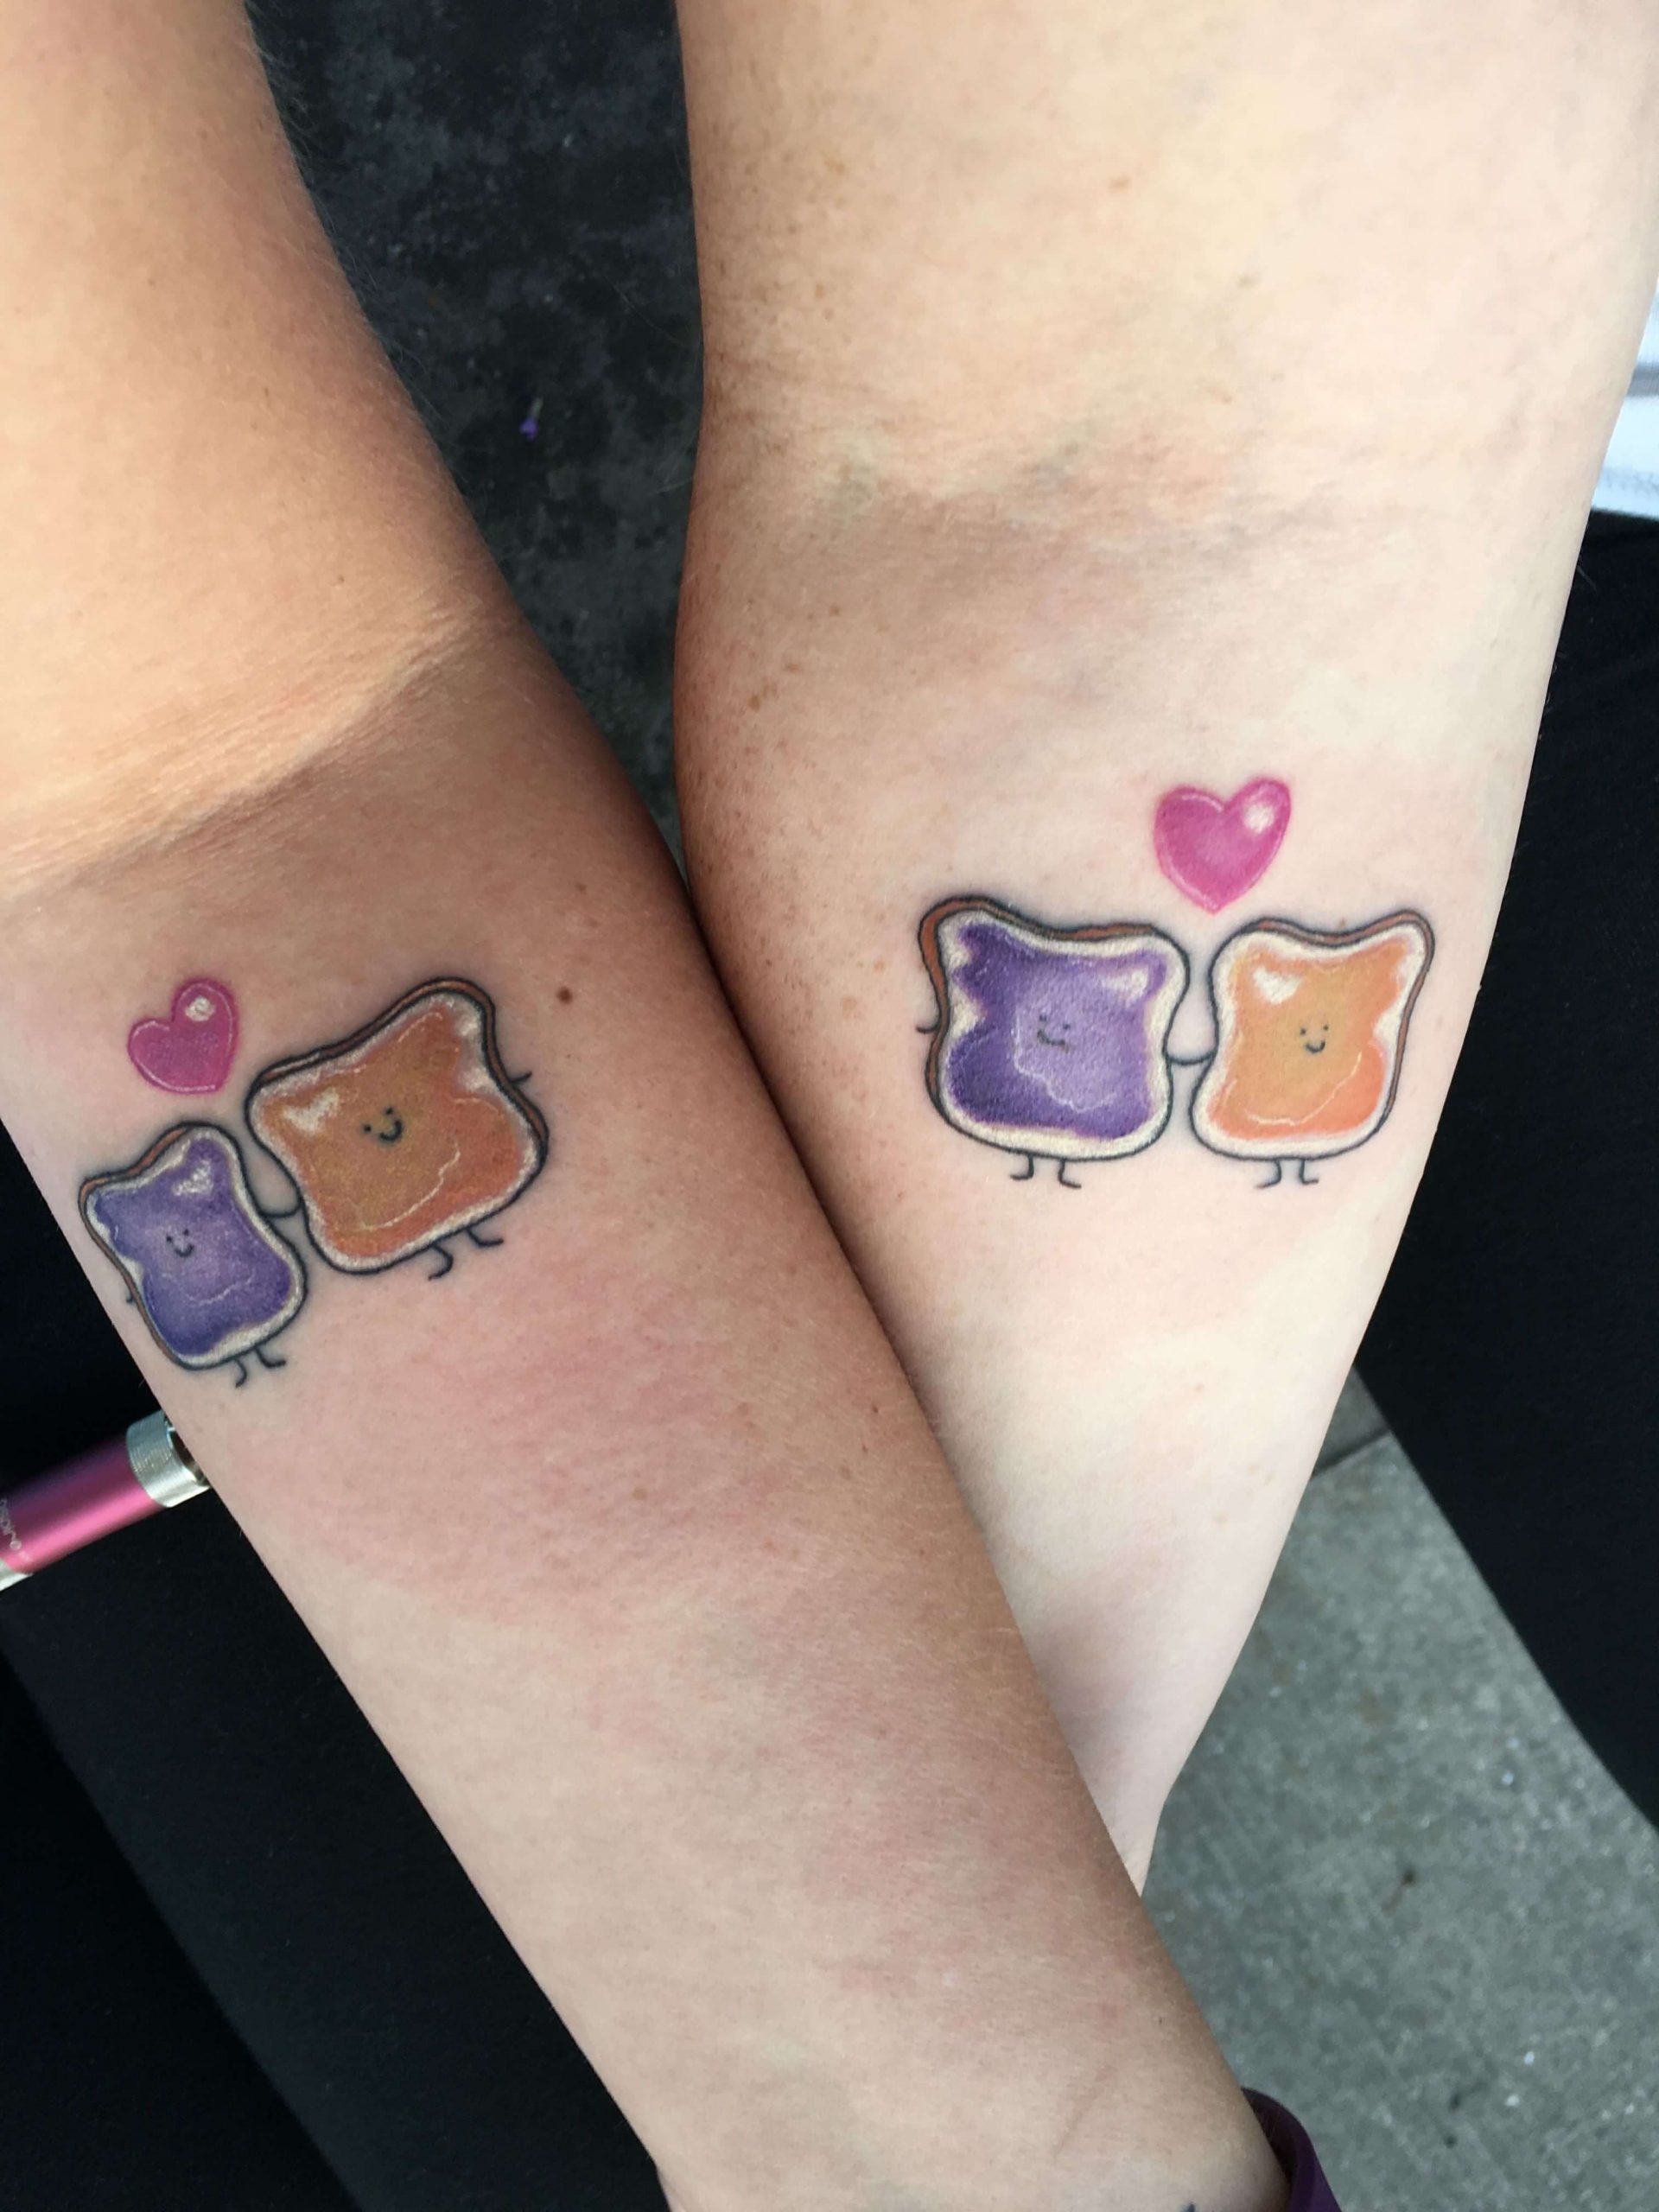 peanut butter and jelly tattoo 5 scaled 51 Ideas For Peanut Butter and Jelly Tattoos: The Latest Trend in Body Art